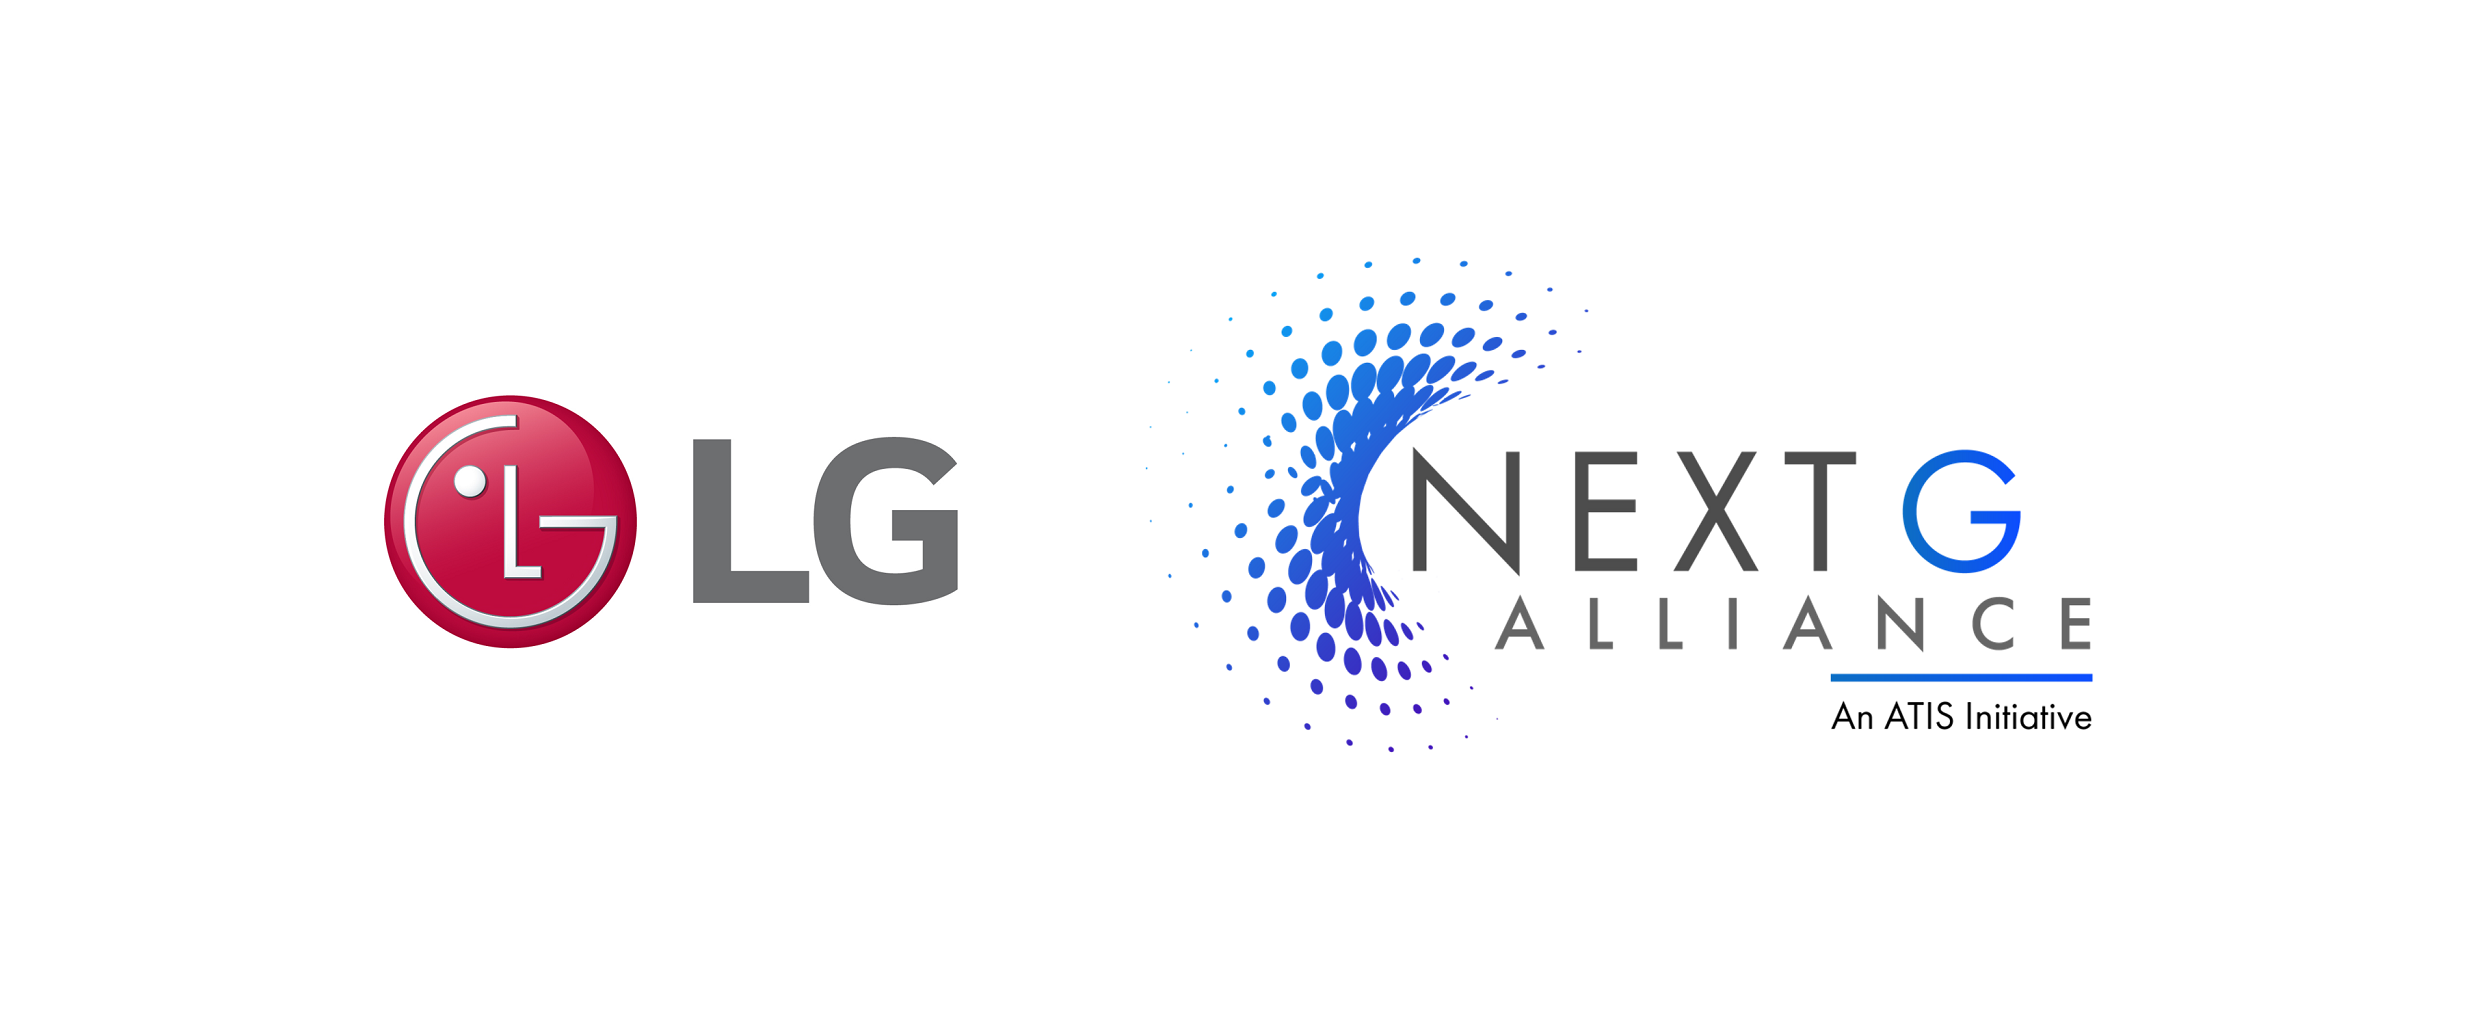 Logo of LG Electronics and Next G Alliance placed side by side